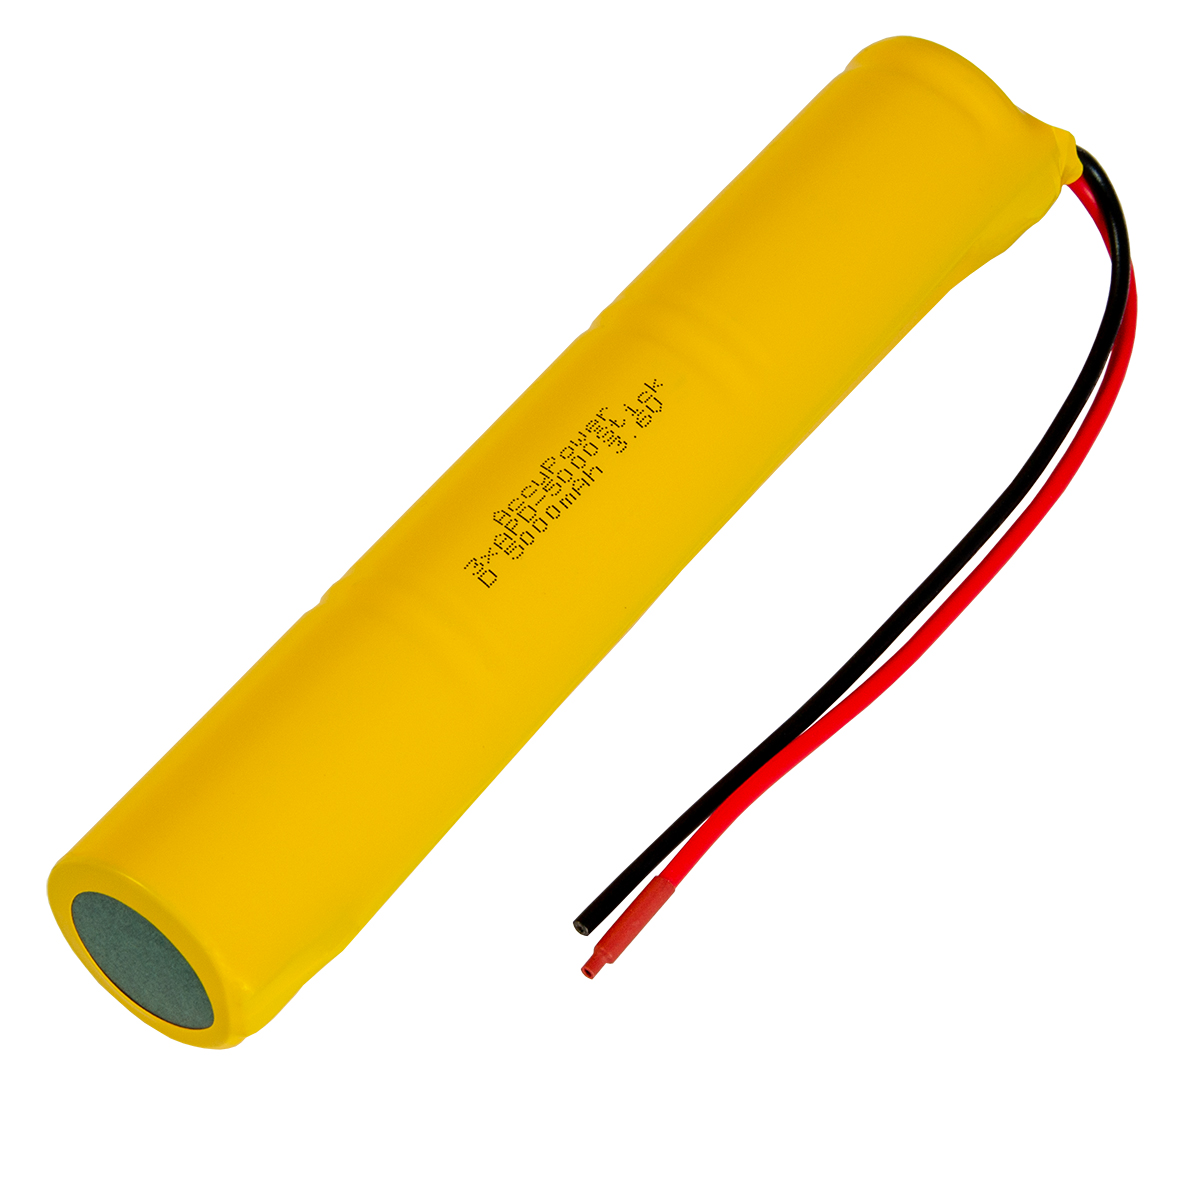 AccuPower battery for Emergency light 3,6V Mono/D Stick 5000mAh